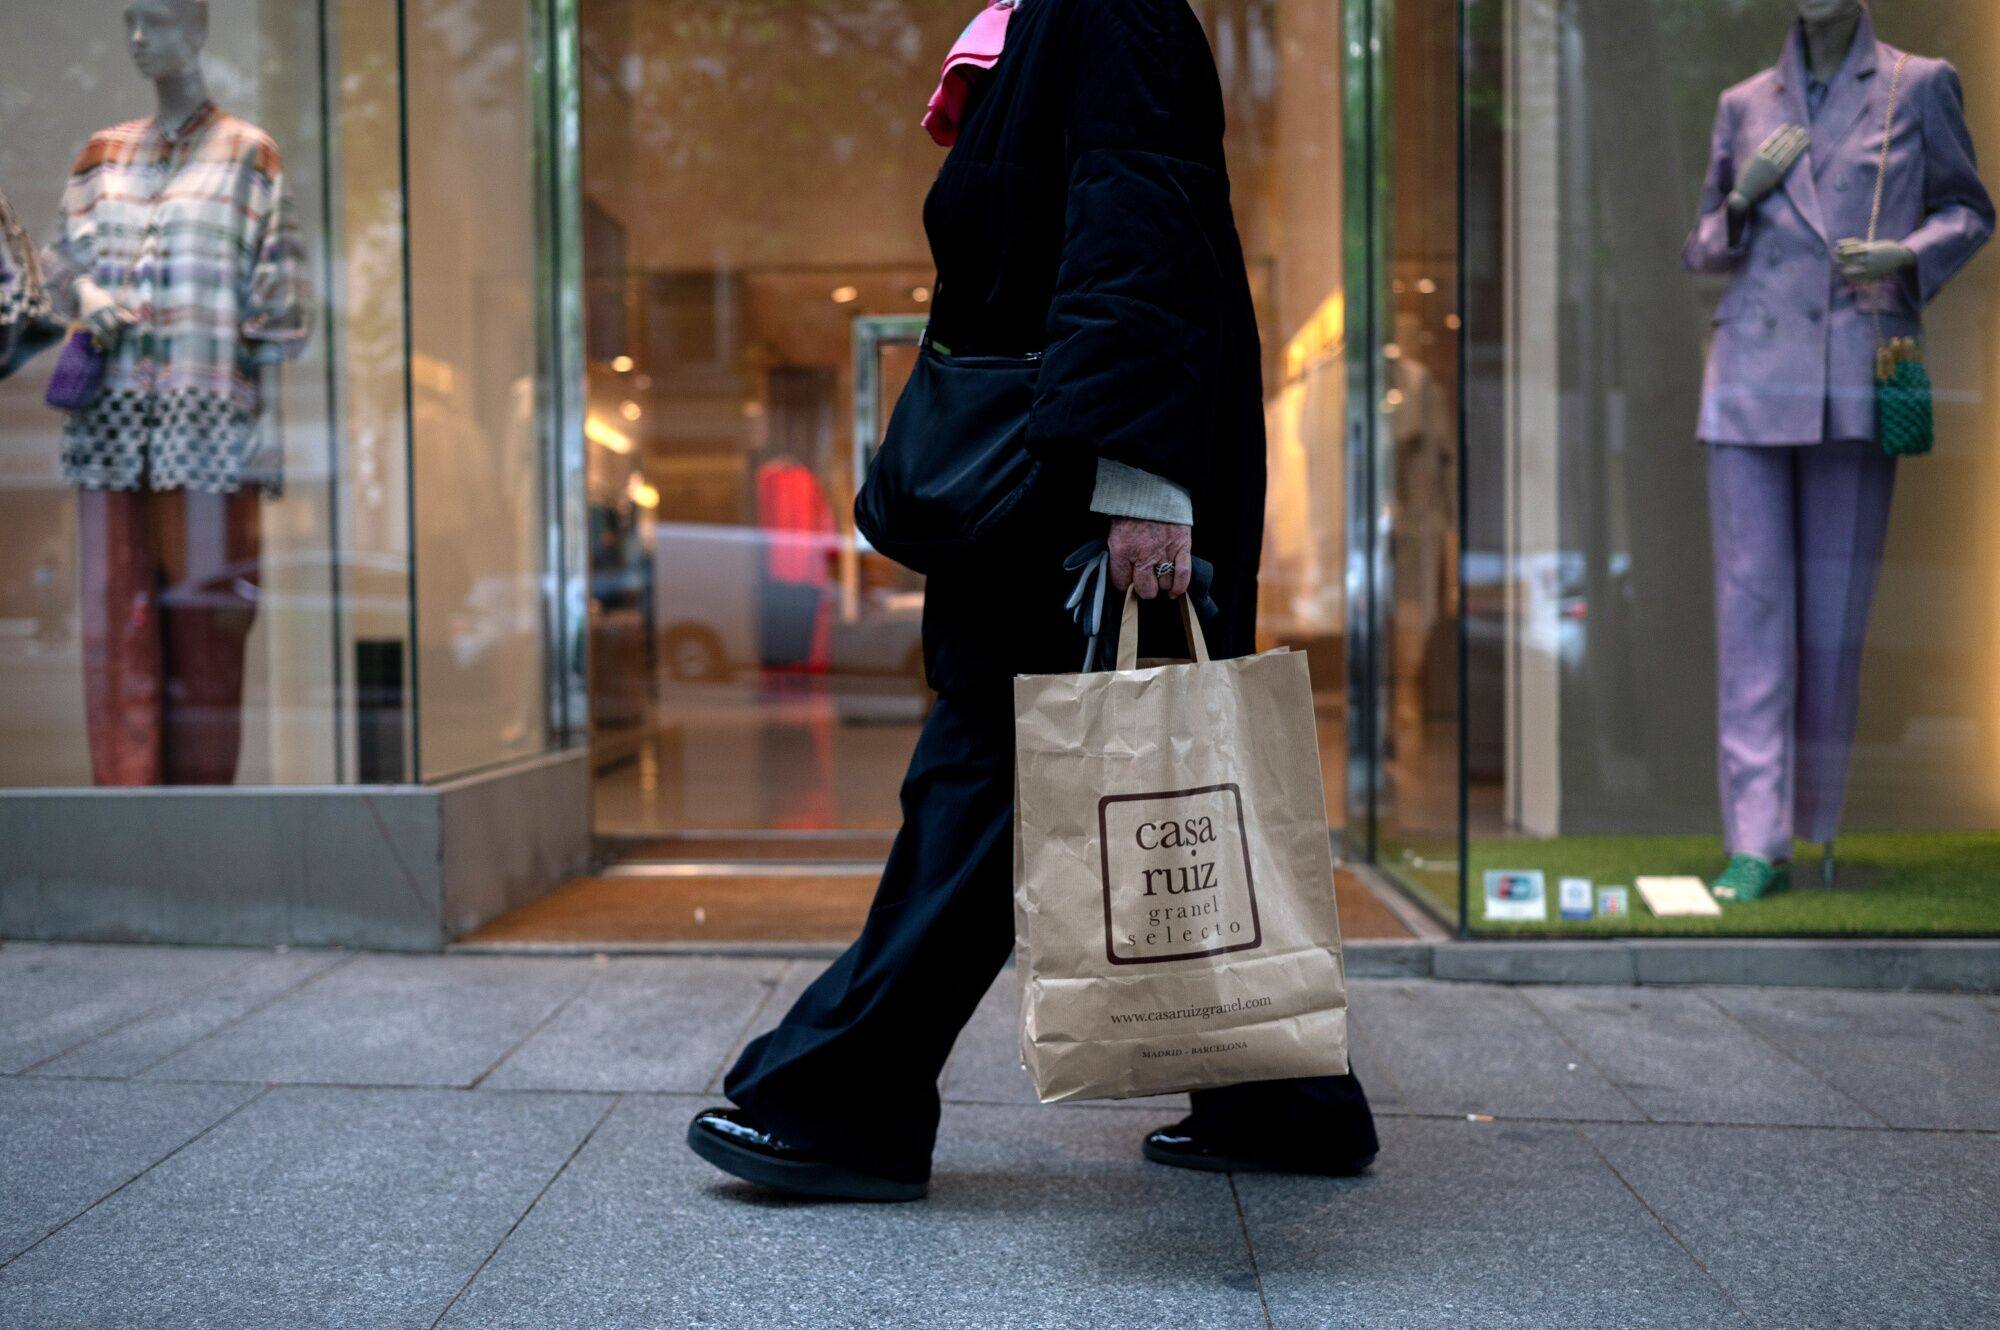 A shopper carries a bag in central Madrid. Since the UK scrapped a tax rebate scheme for tourists, many travellers have instead visited the Spanish capital to take advantage of tax breaks. Photo: Bloomberg